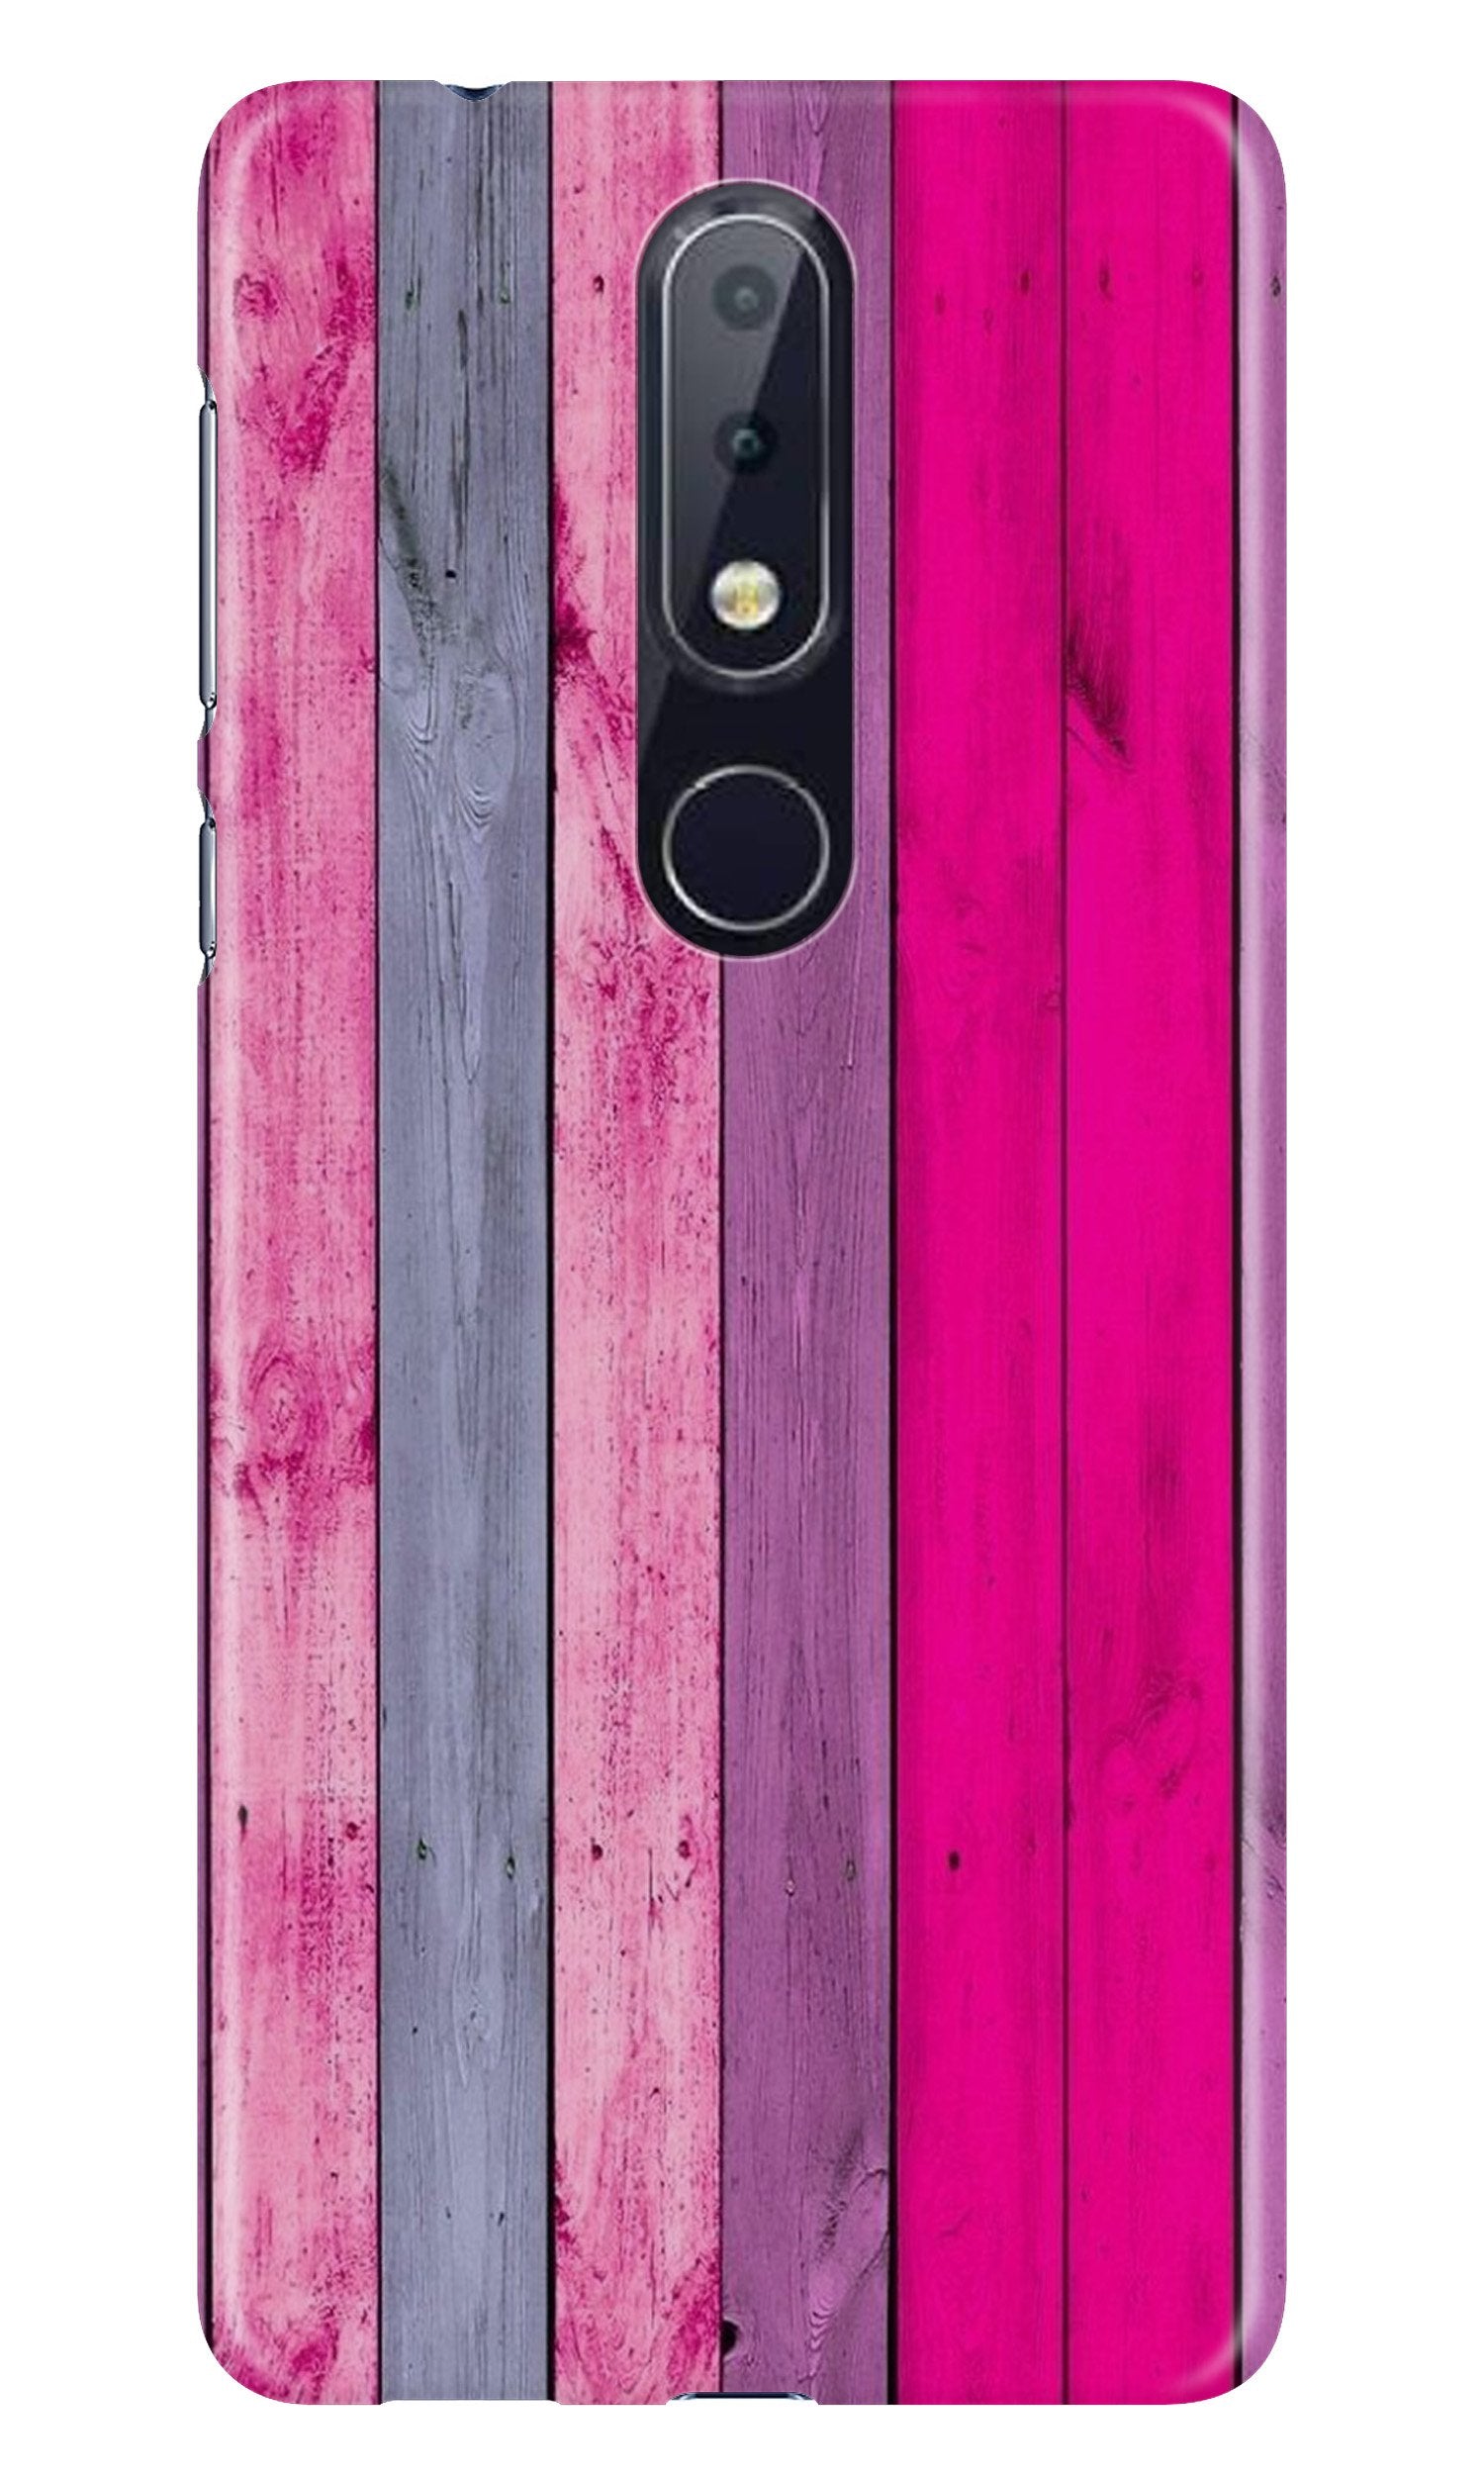 Wooden look Case for Nokia 6.1 Plus